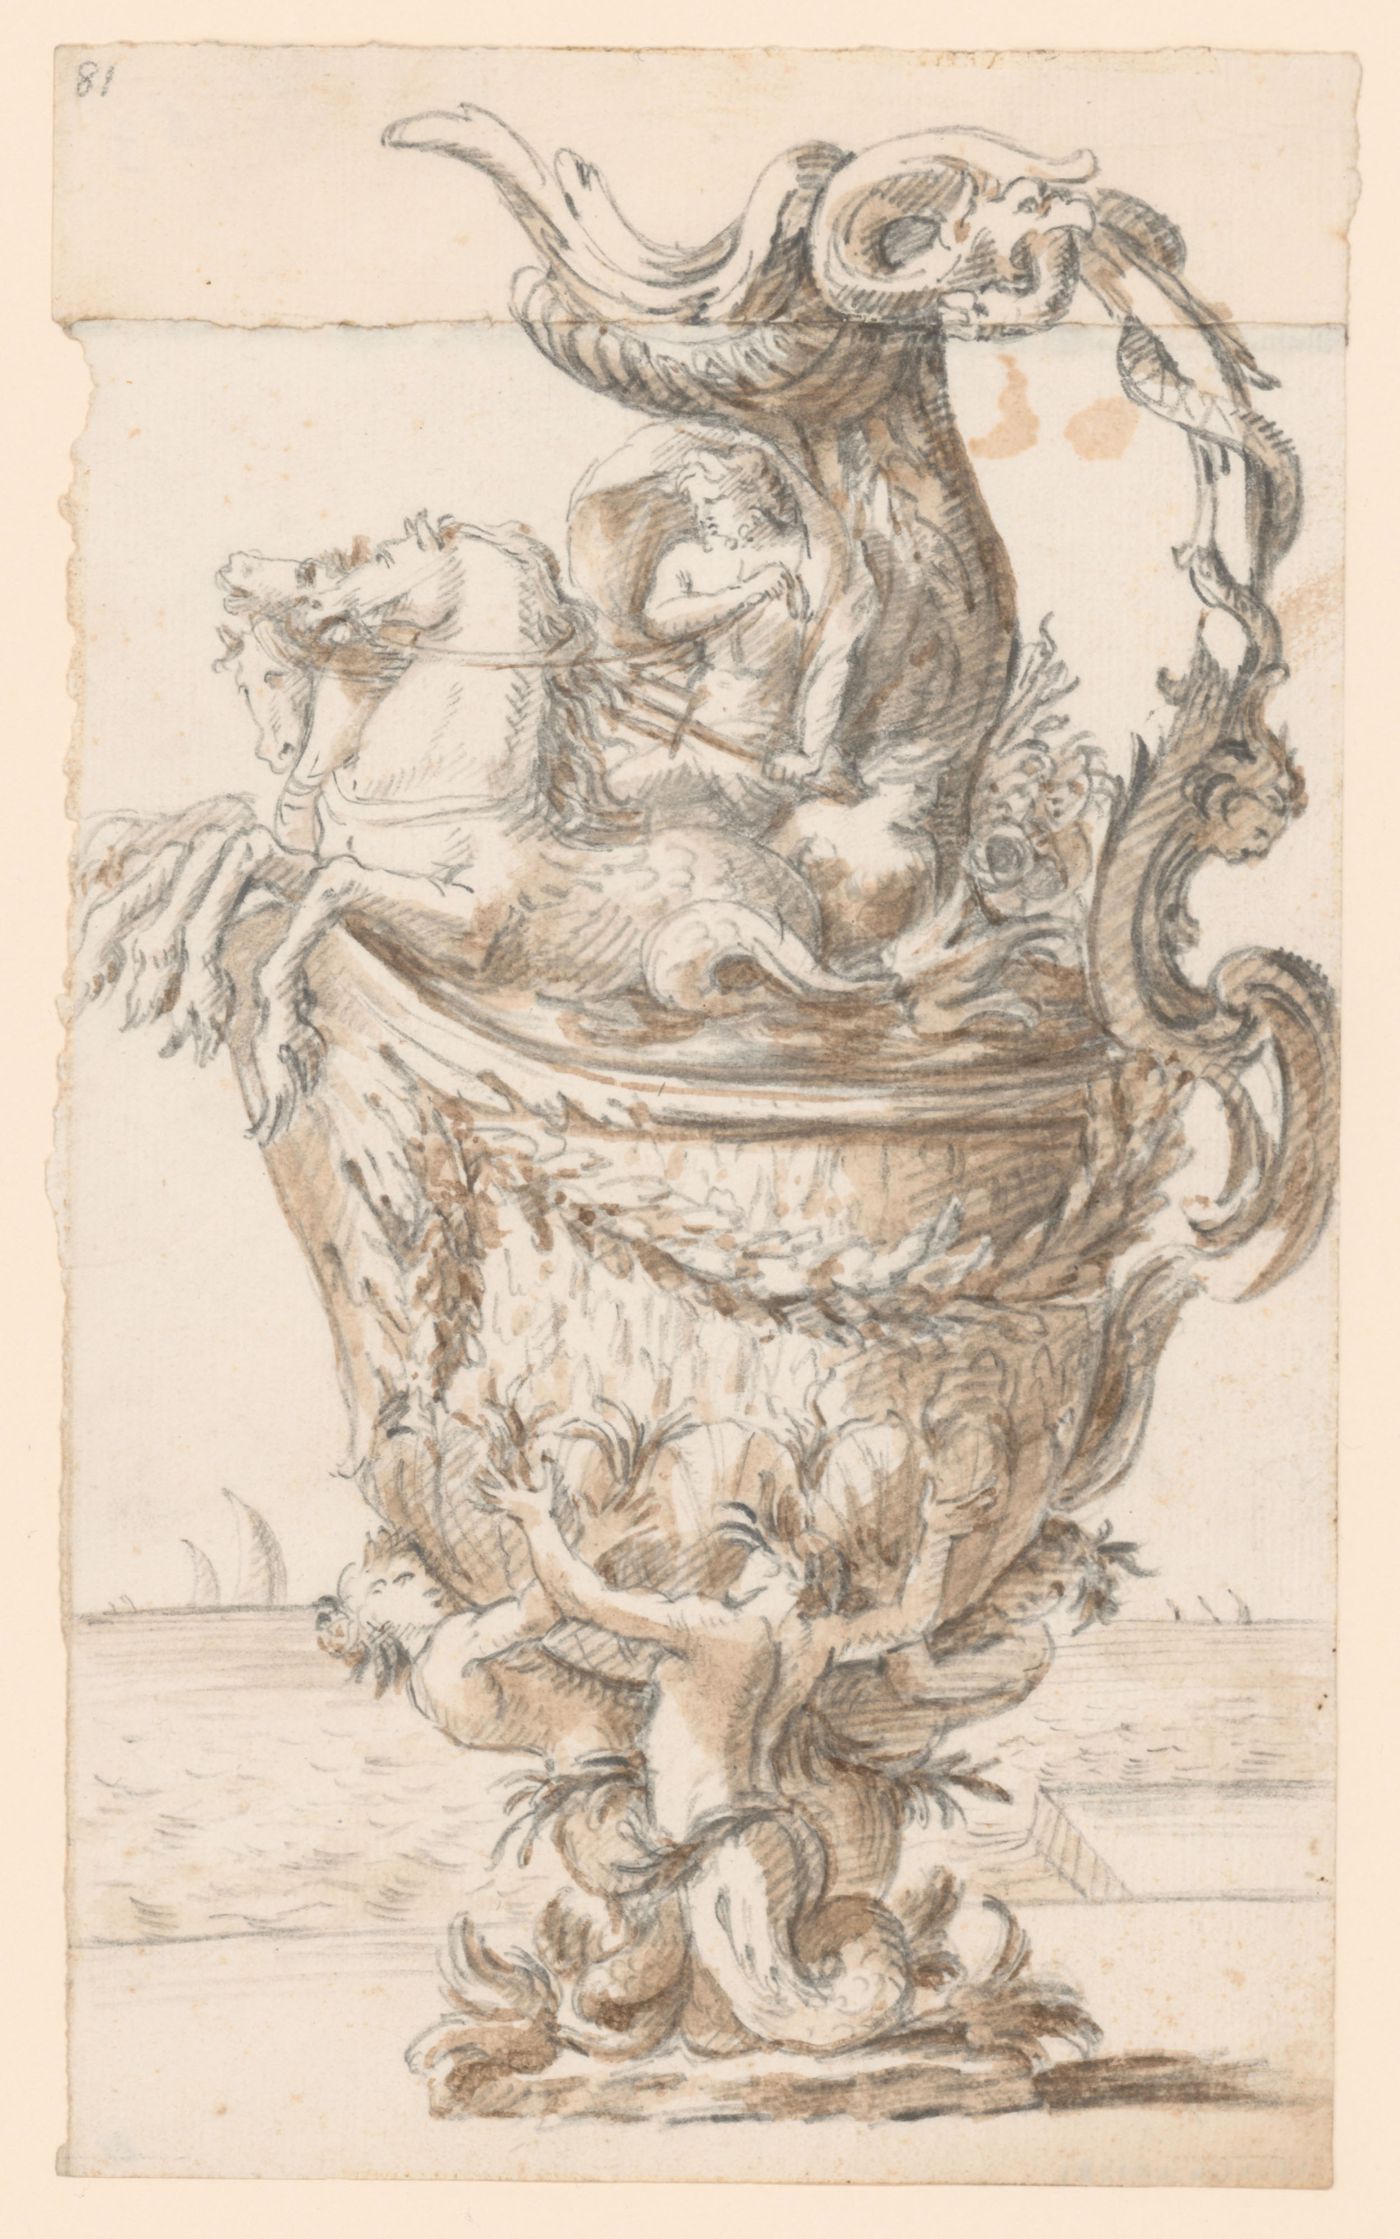 Drawing for an ornamental vase with Neptune in his chariot and with tritons at the base